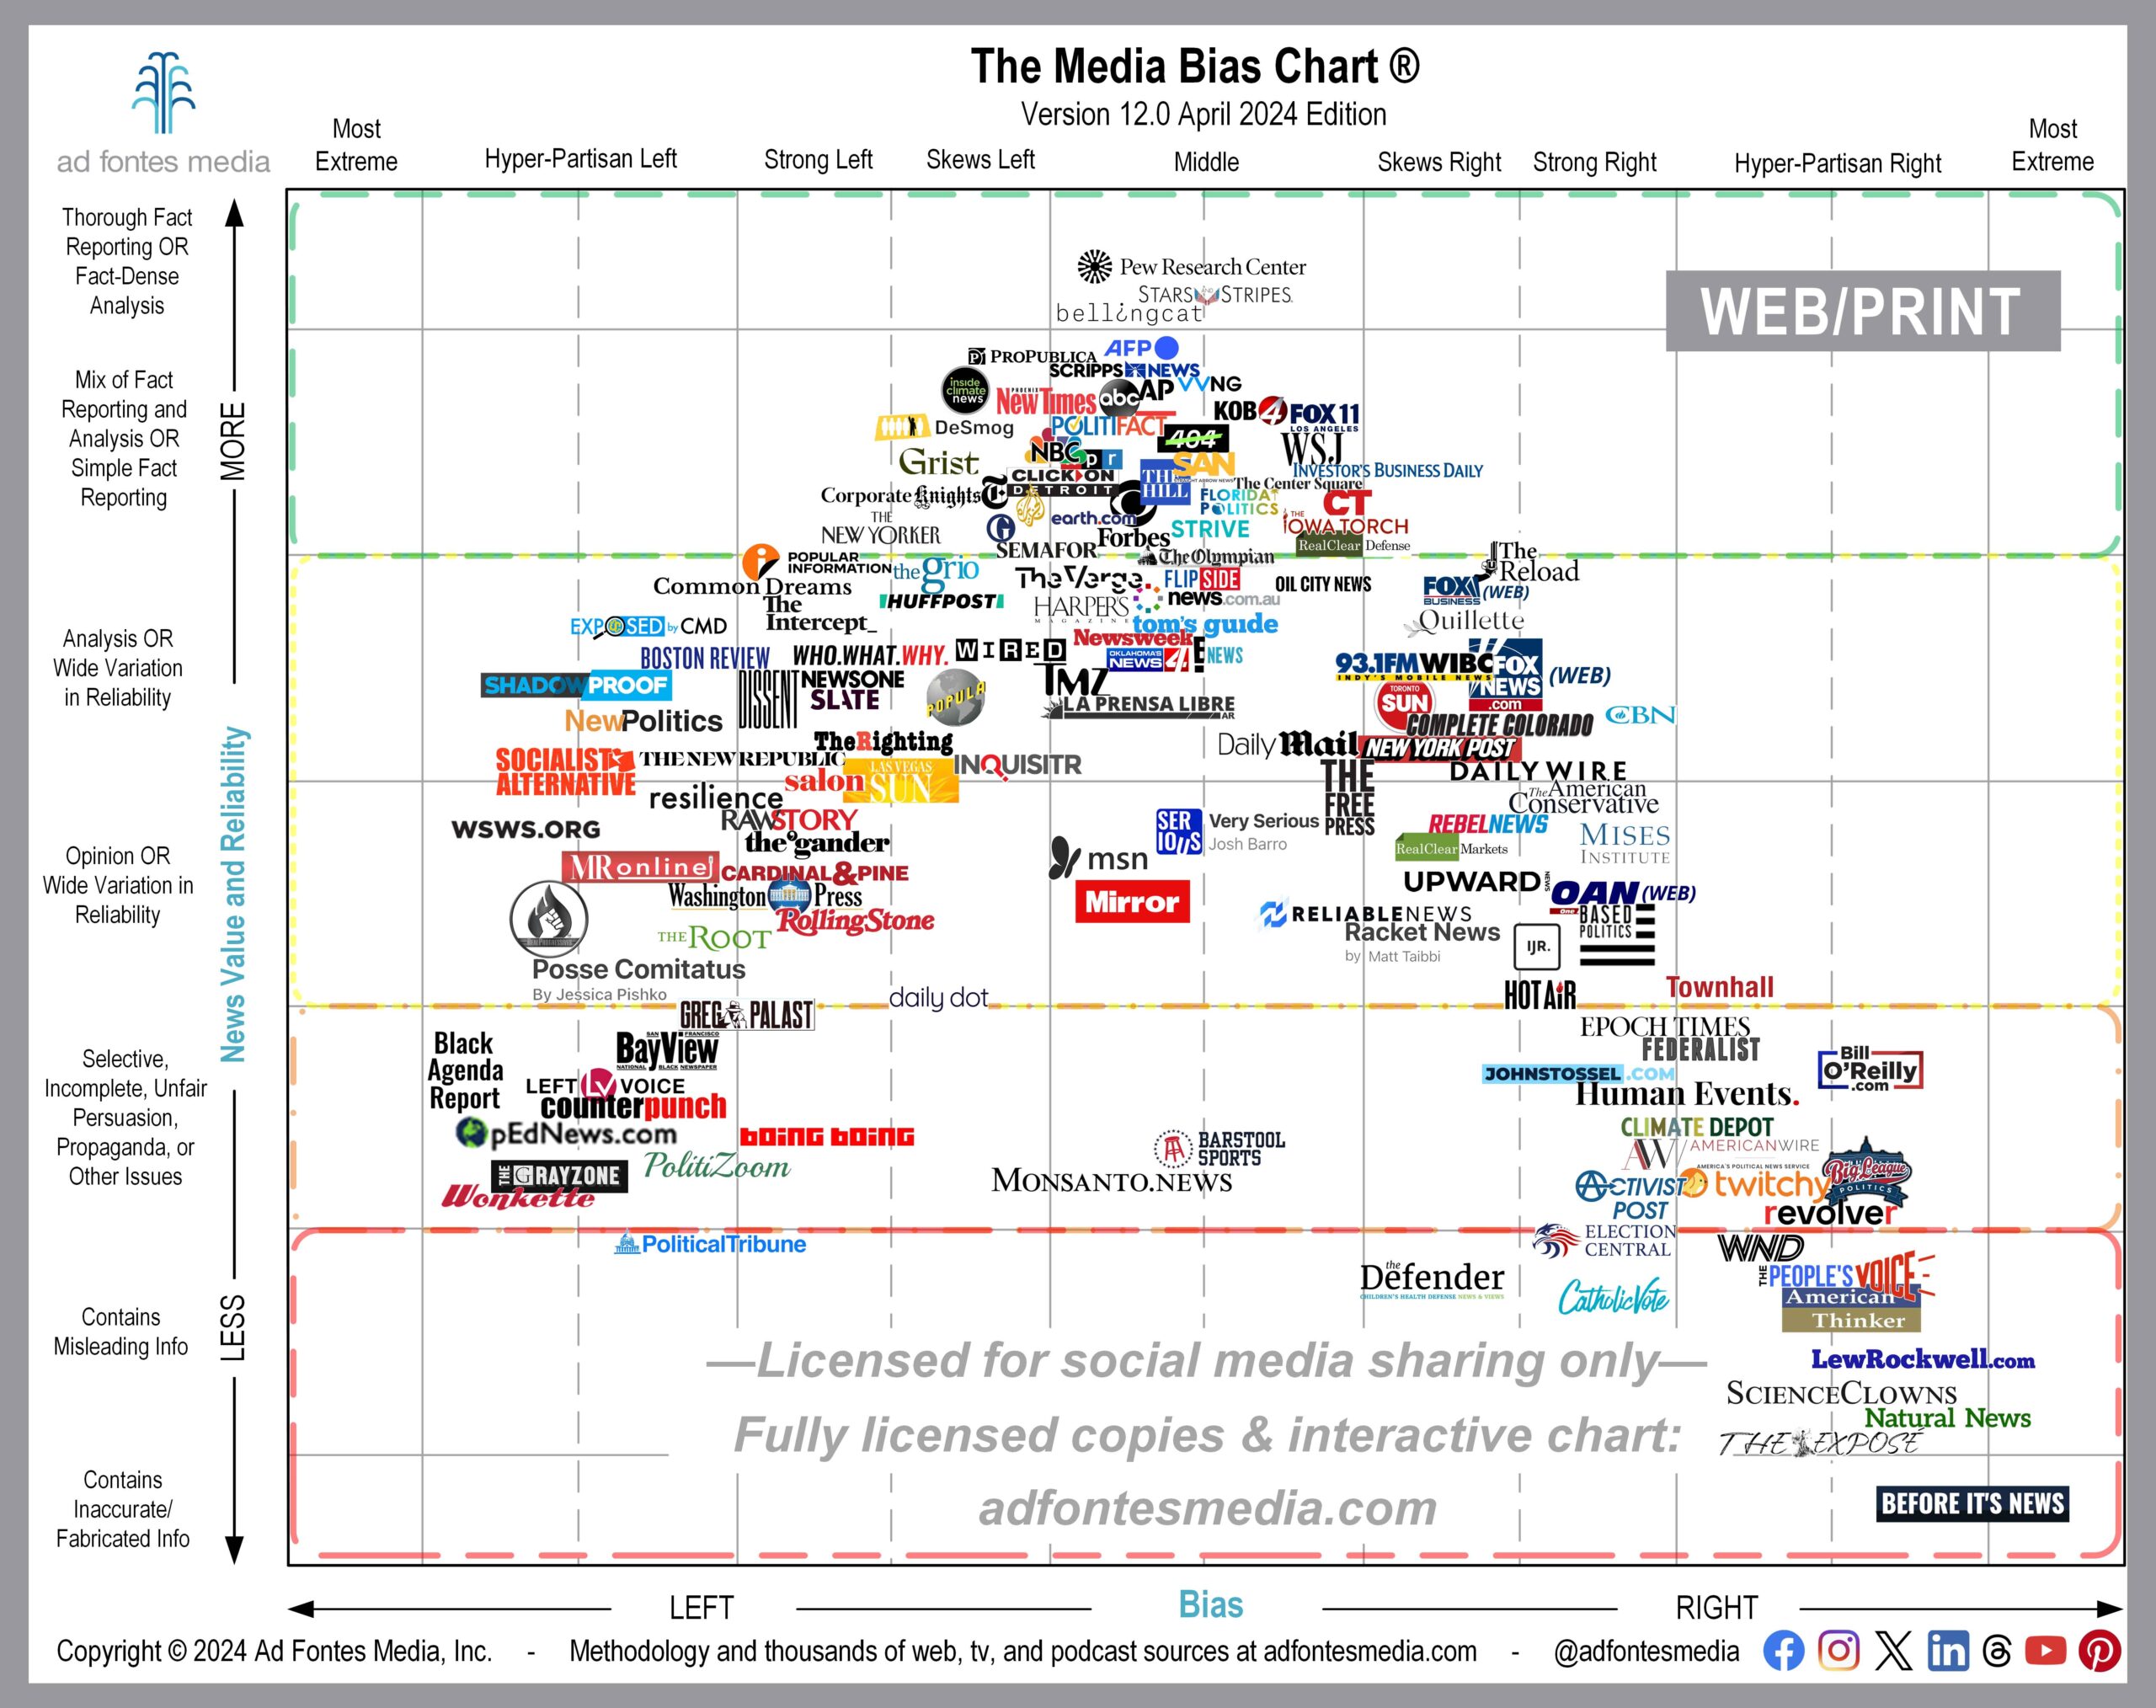 April Web/Print Media Bias Chart features 146 sources, 12 of them for the first time